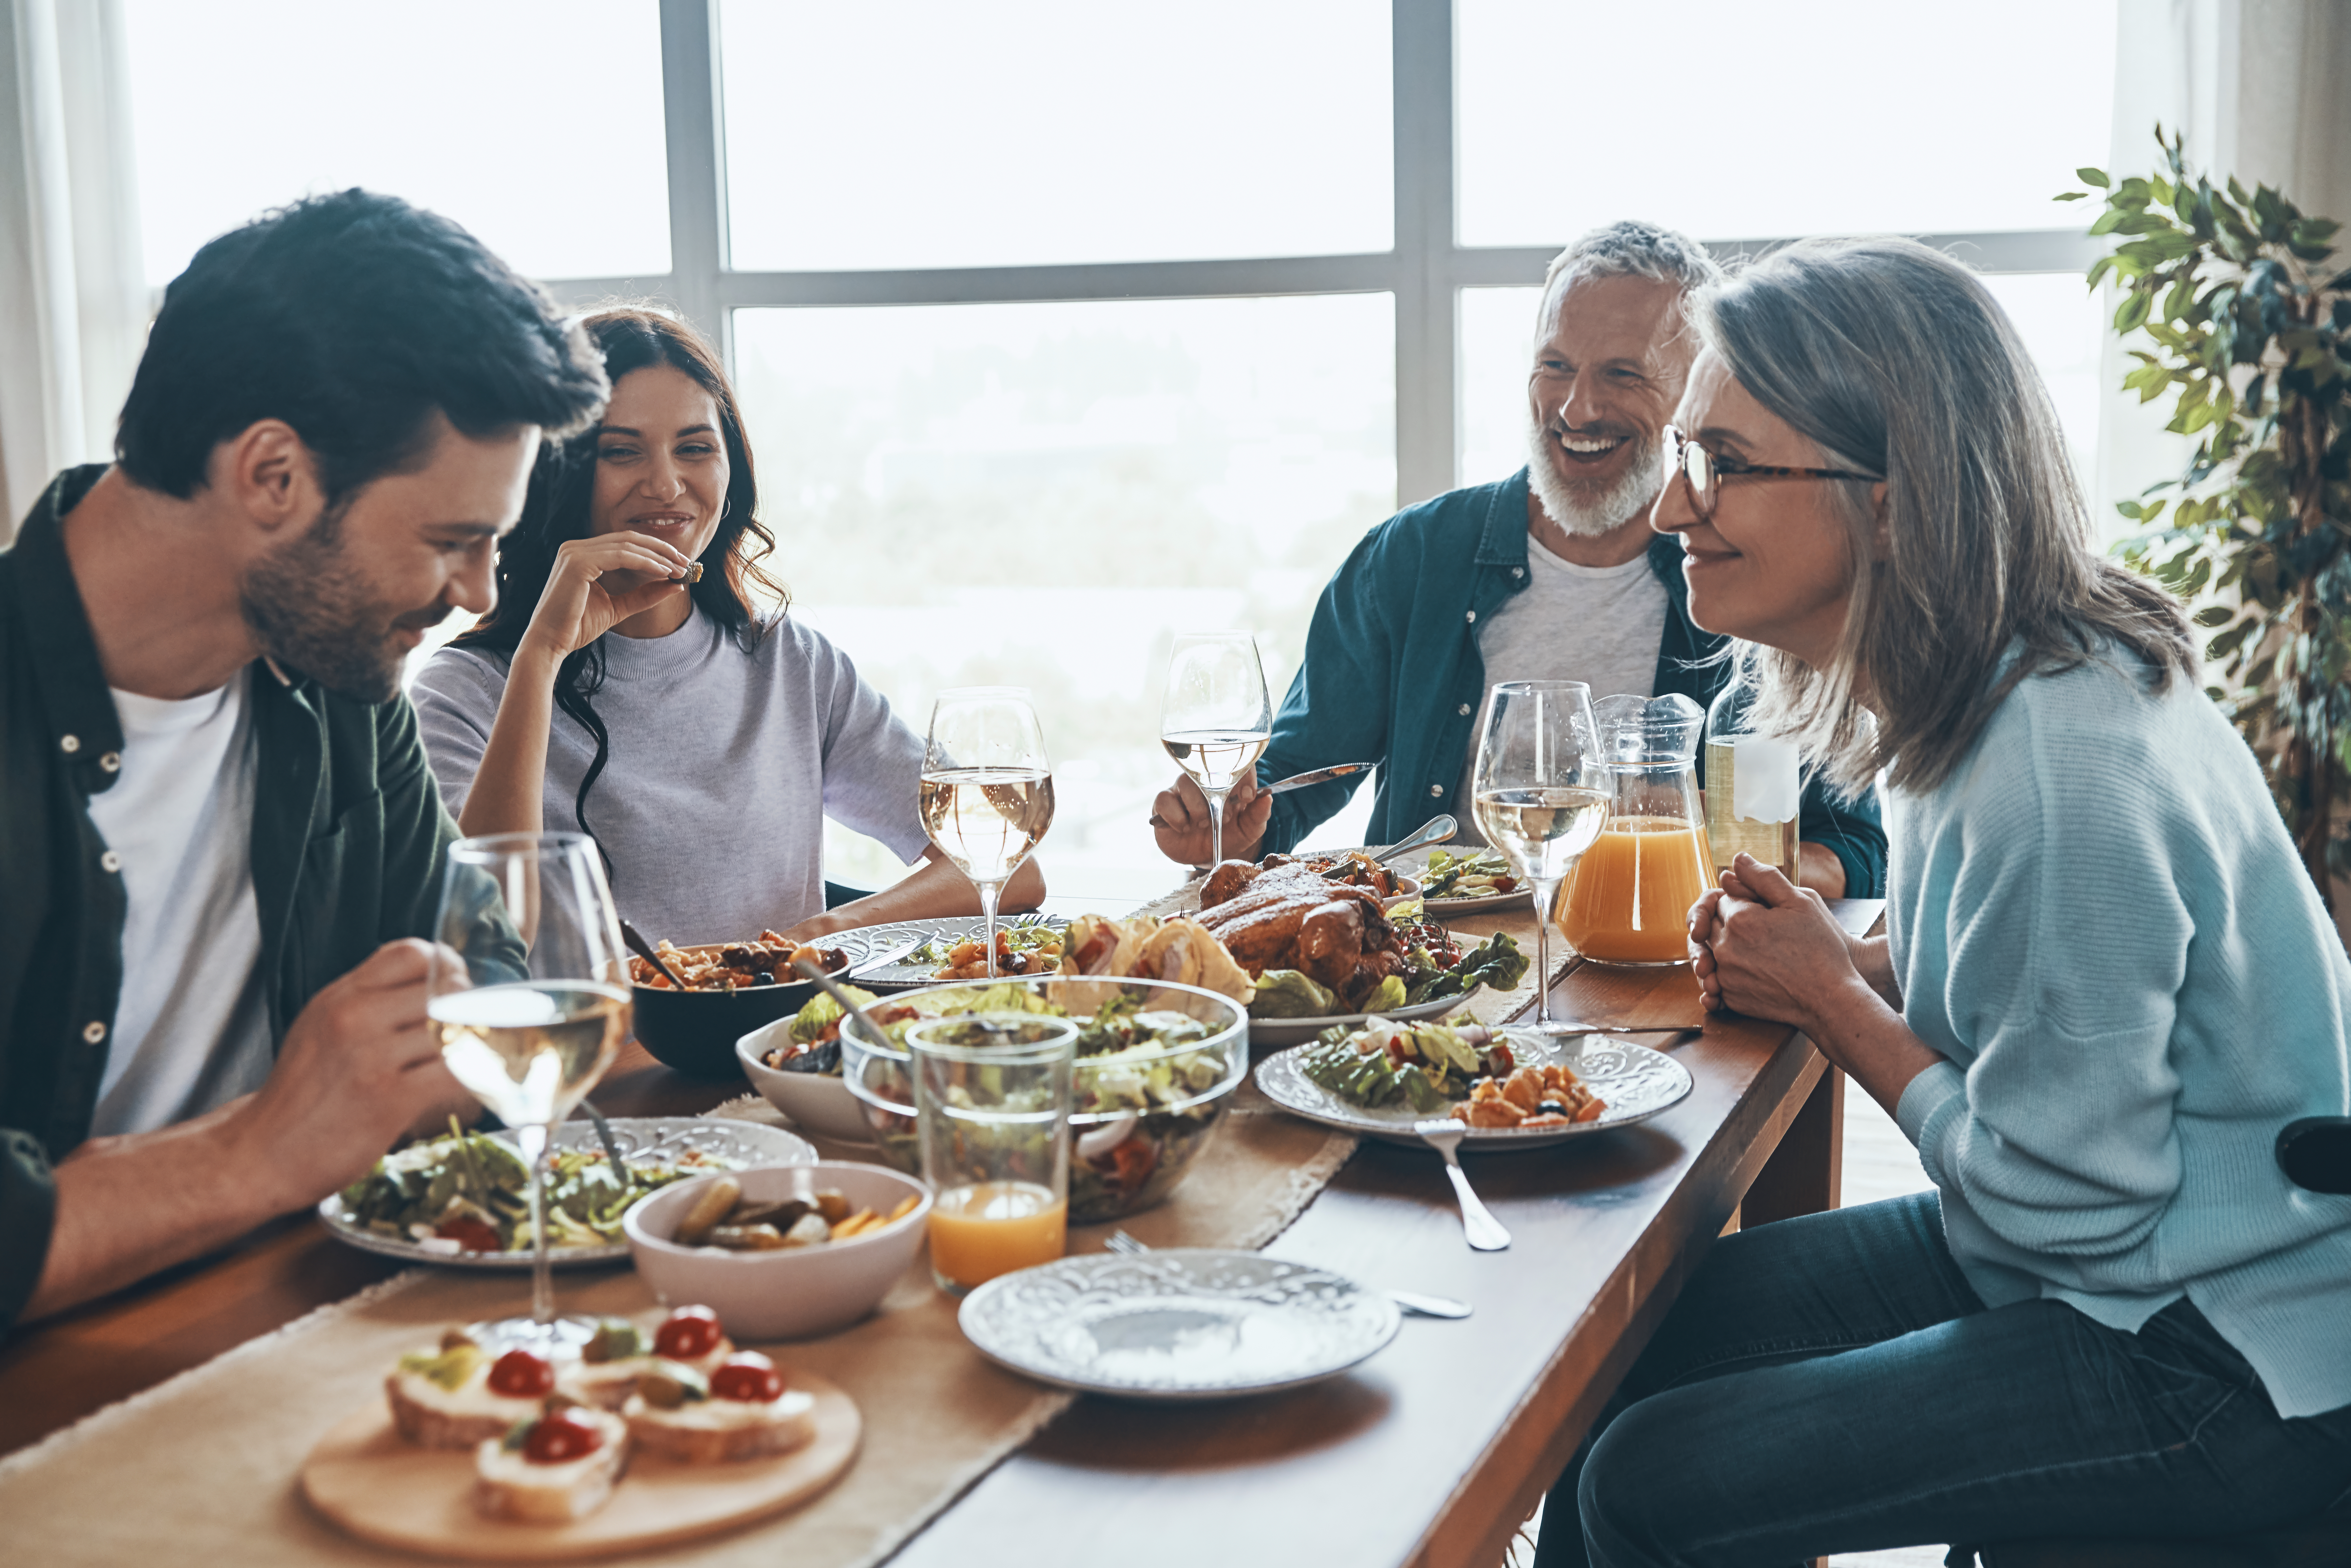 Diner with family | Shutterstock